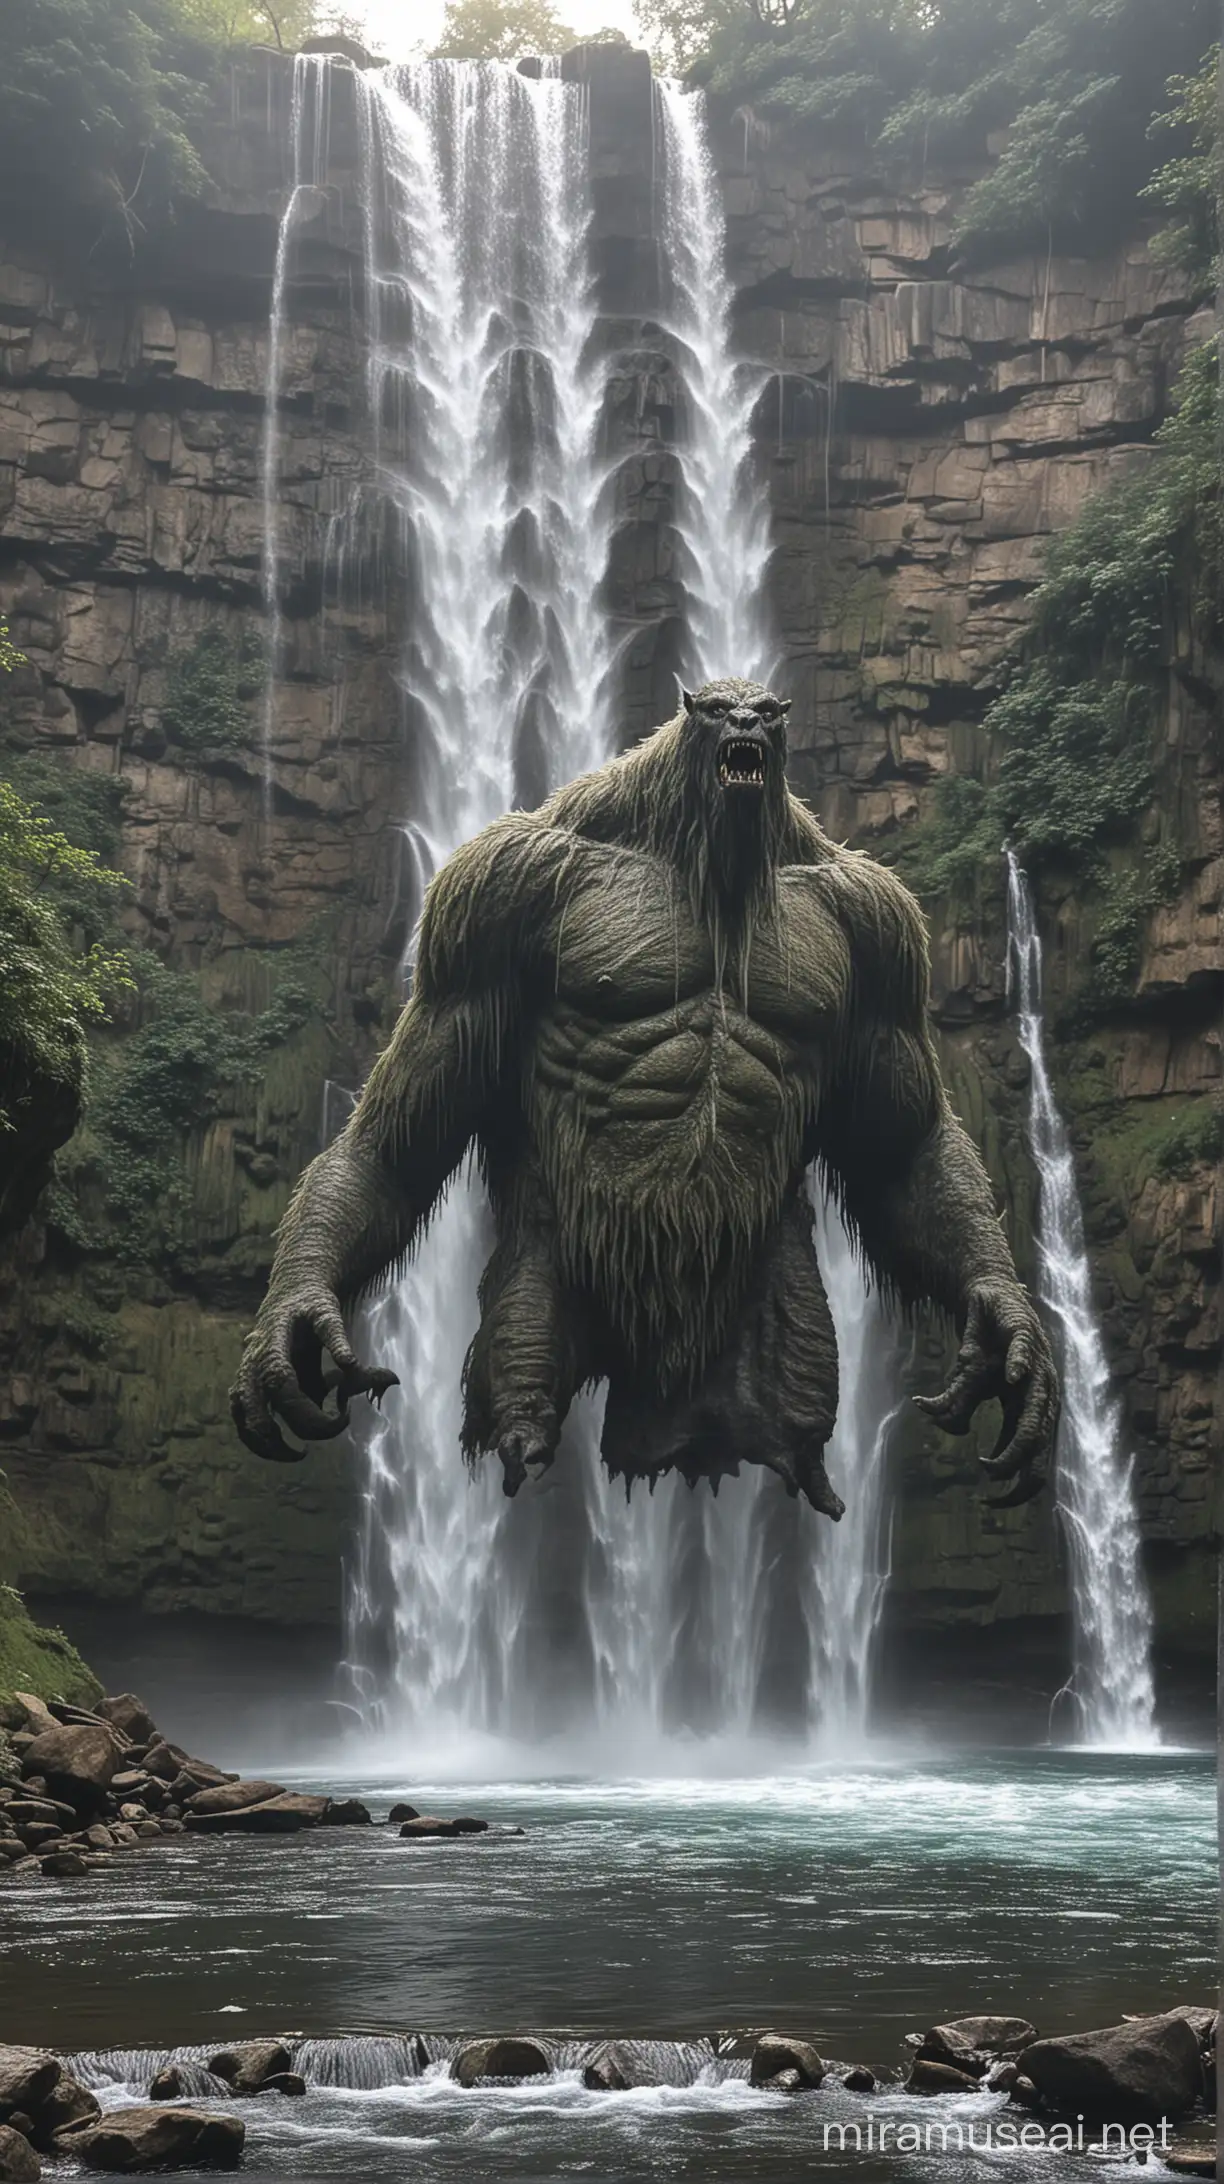 Seen a big monster in waterfall